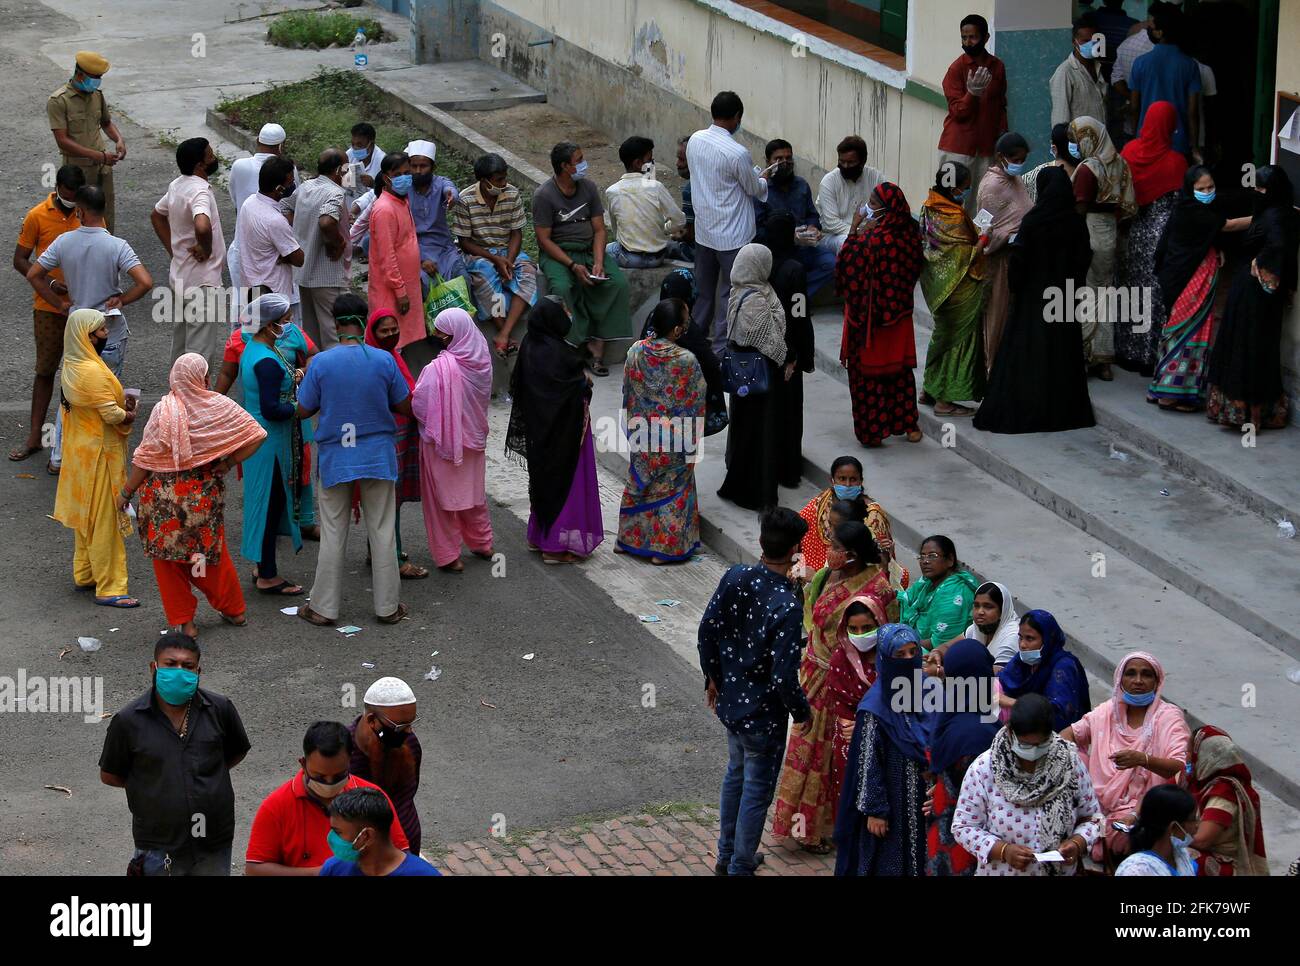 People wait to cast their votes outside a polling station during the eight and final phase of West Bengal state election, amid the spread of the coronavirus disease (COVID-19) in Kolkata, India, April 29, 2021. REUTERS/Rupak De Chowdhuri Stock Photo